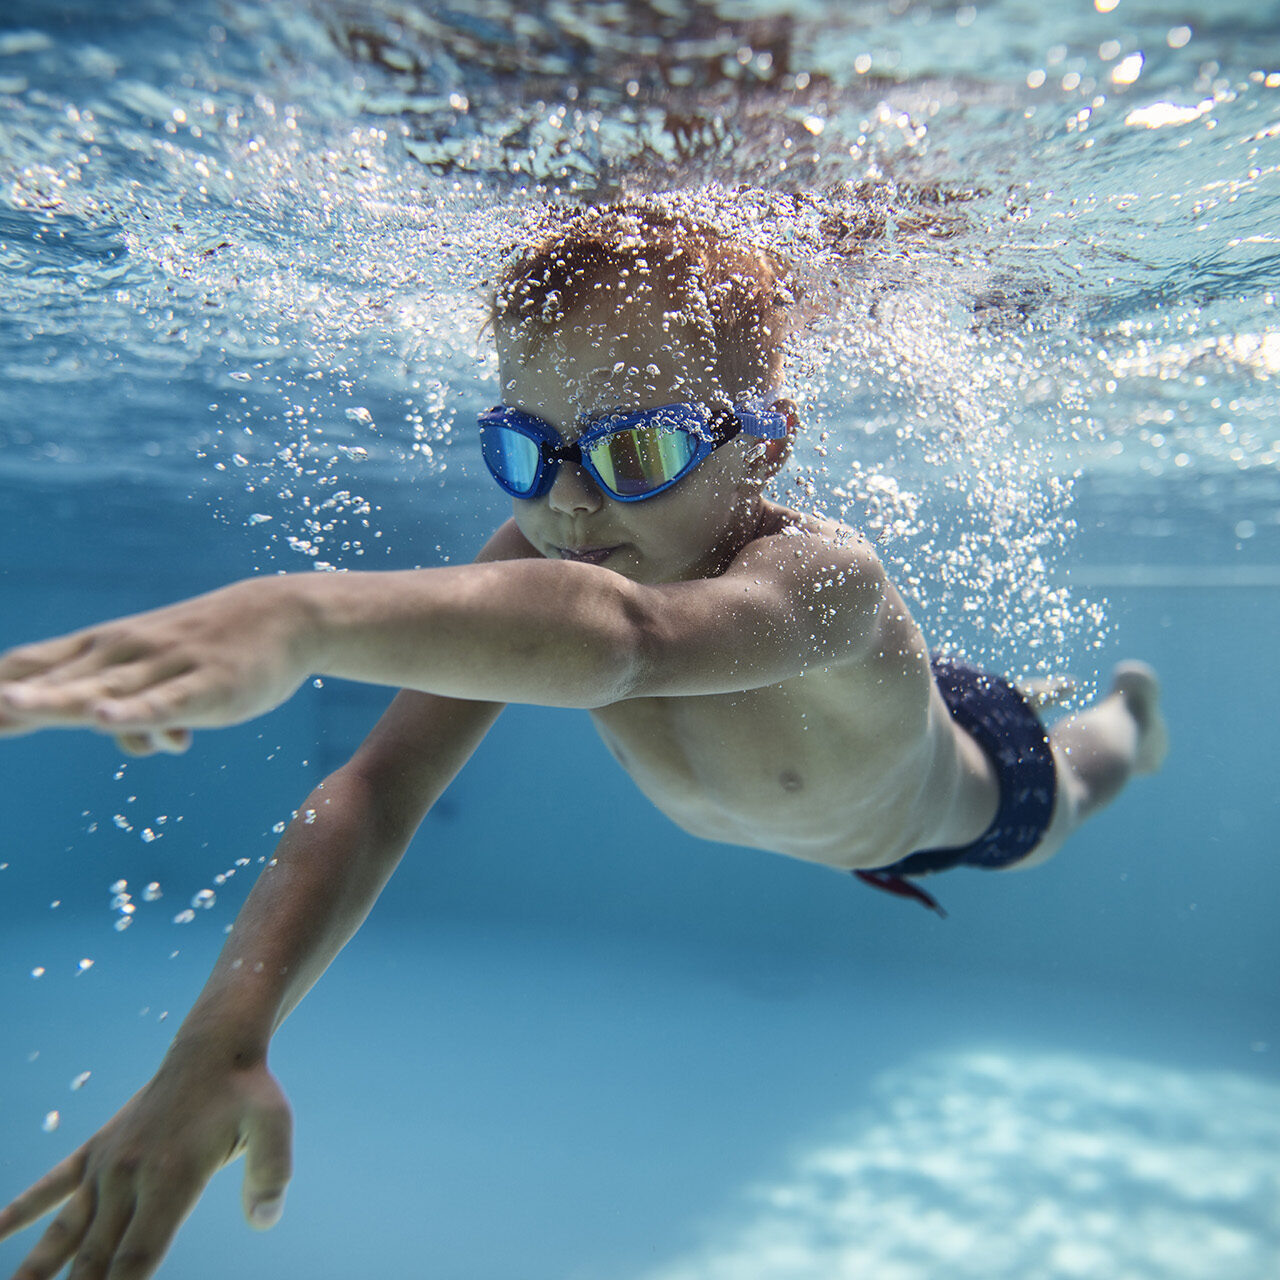 Portrait of little boy swimming underwater in the pool. Sunny summer day.
Nikon D850